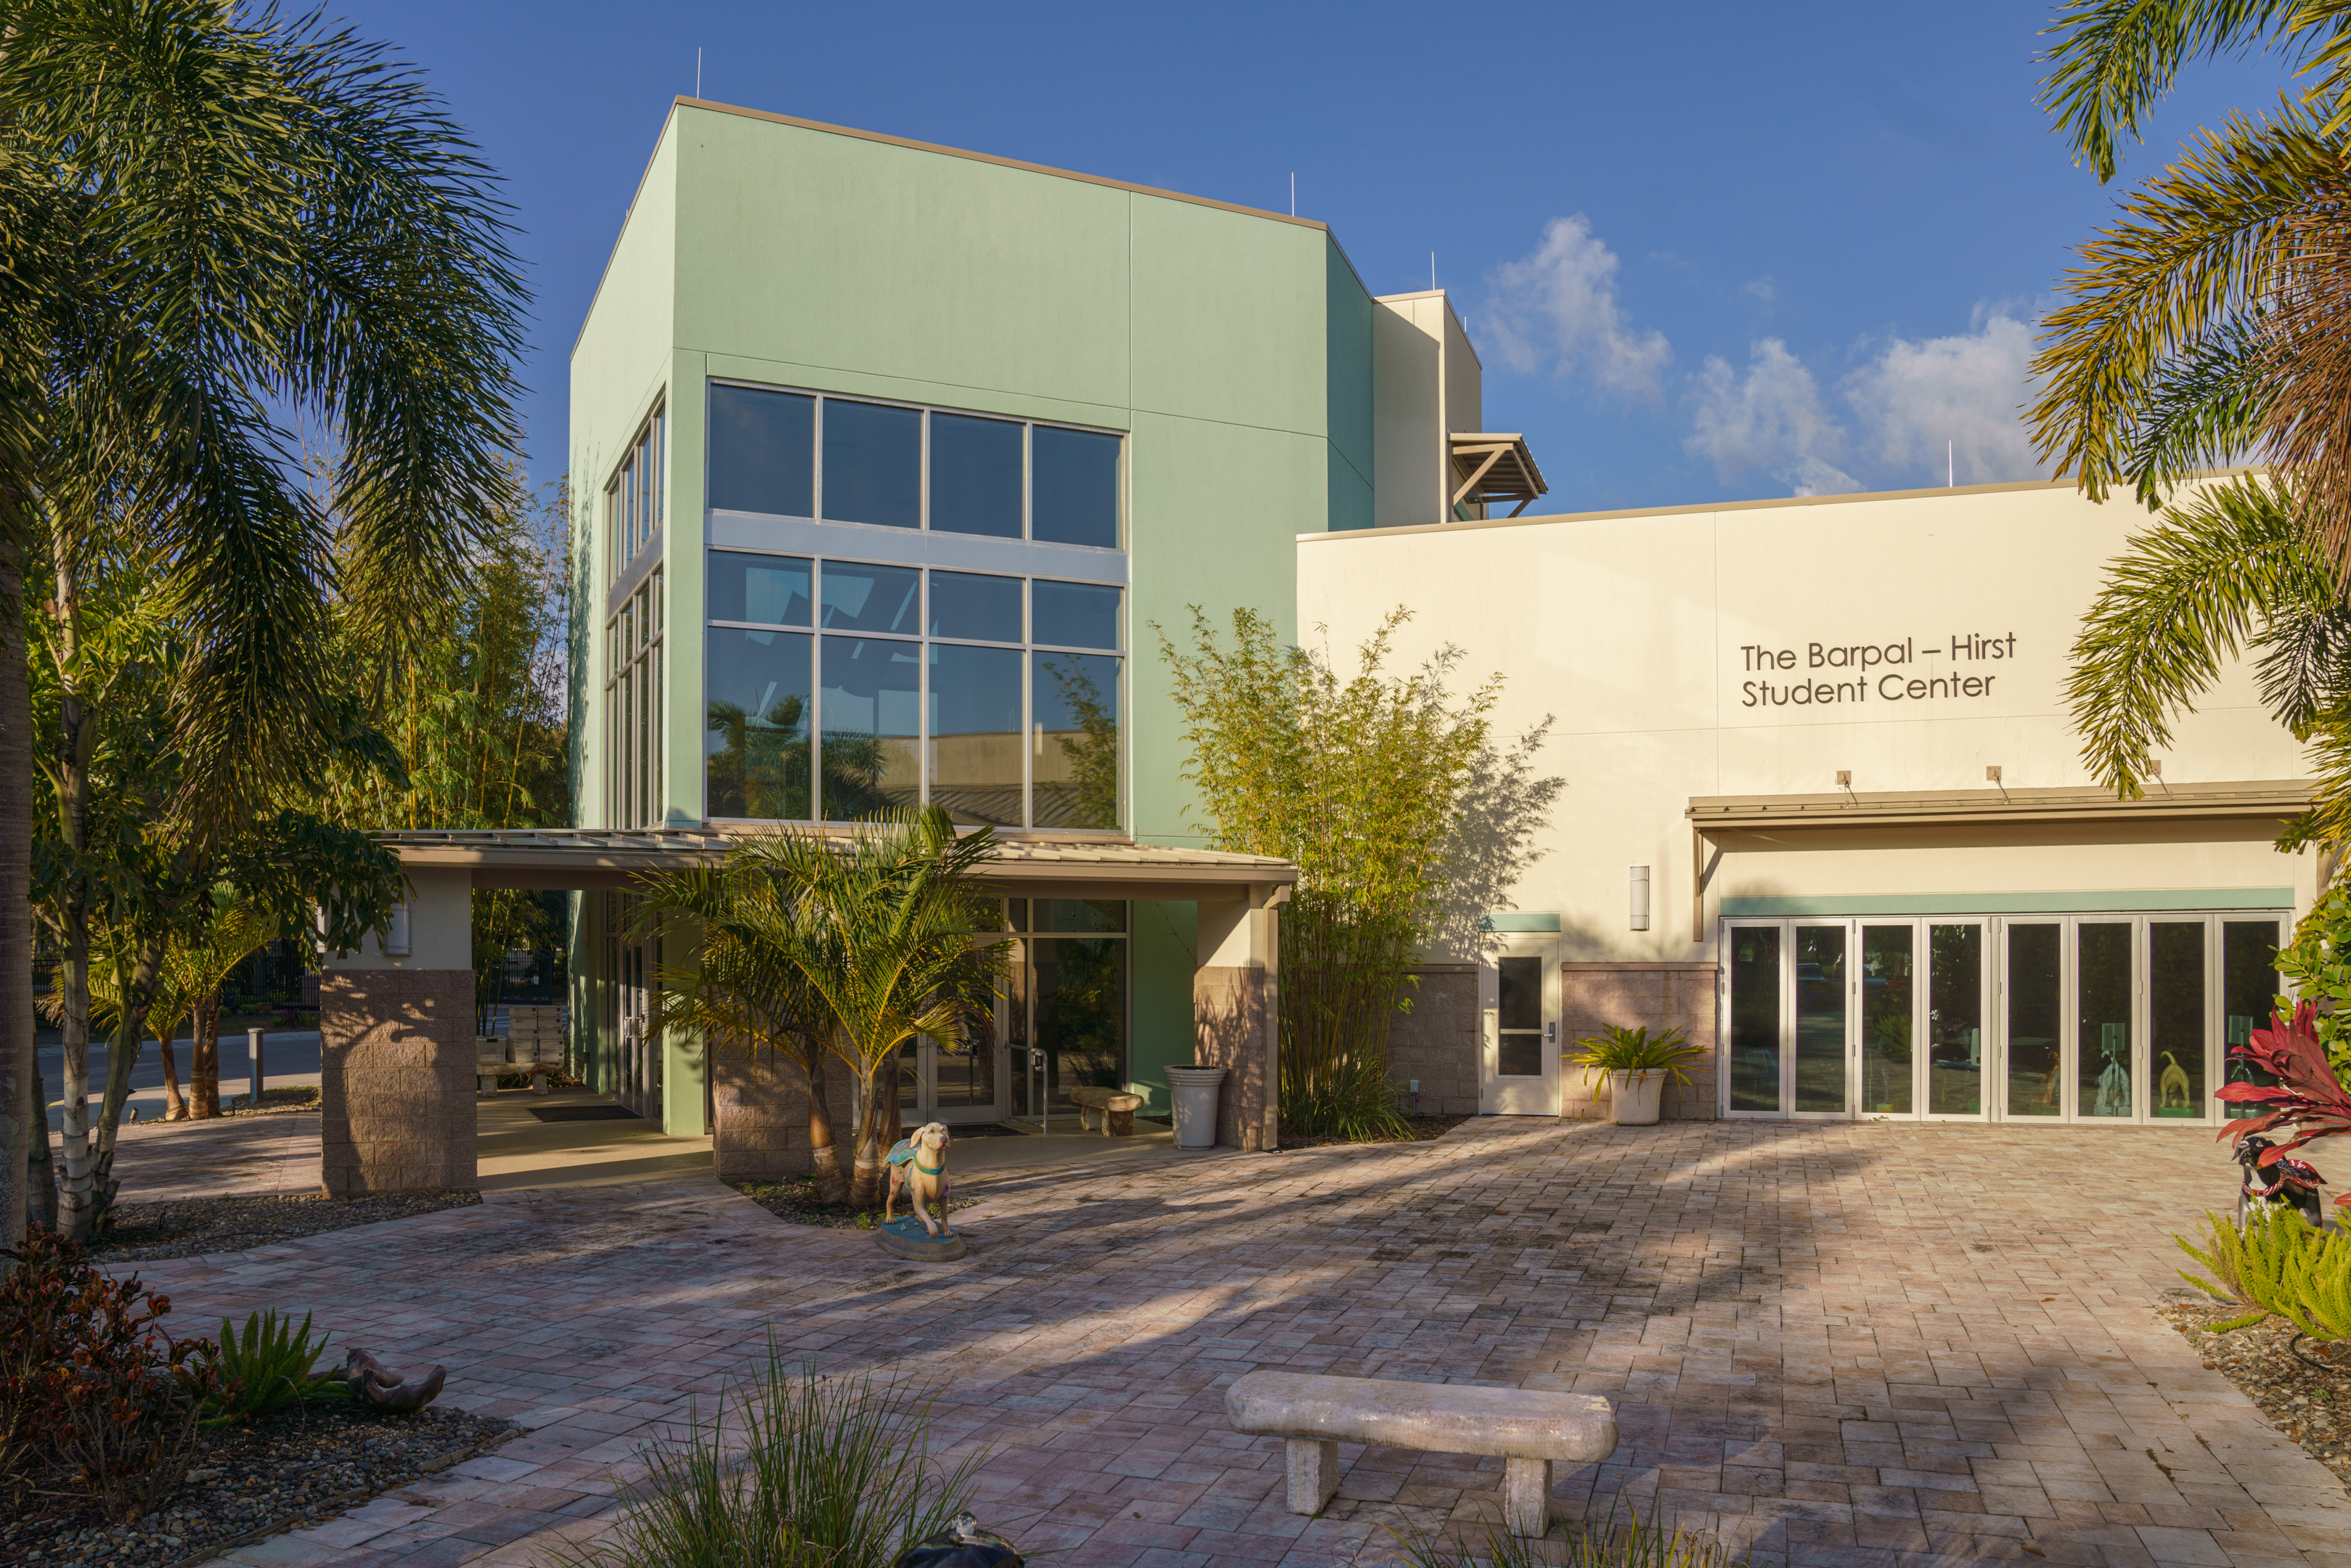 A photo of the exterior of The Barpal - Hirst Student Center at the Southeastern Guide Dogs campus in Palmetto, Florida.